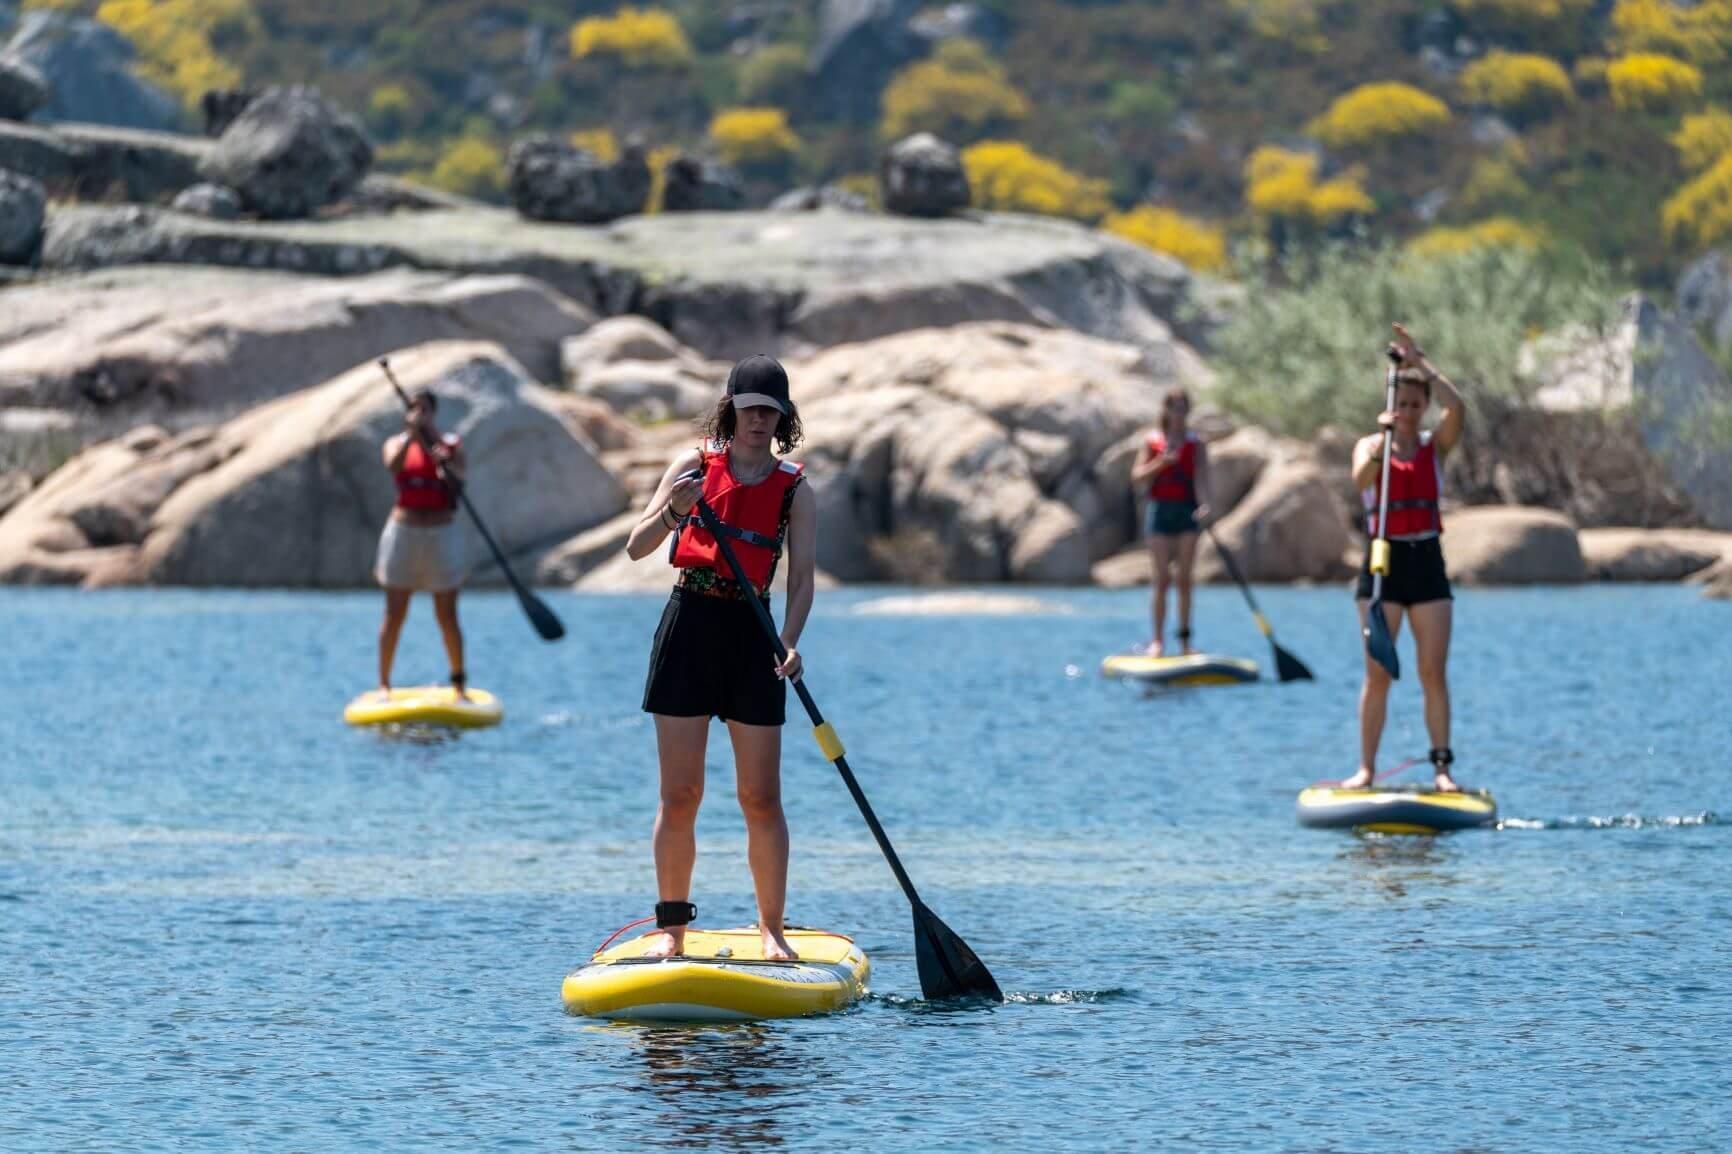 Colorado Stand Up Paddle Boarding